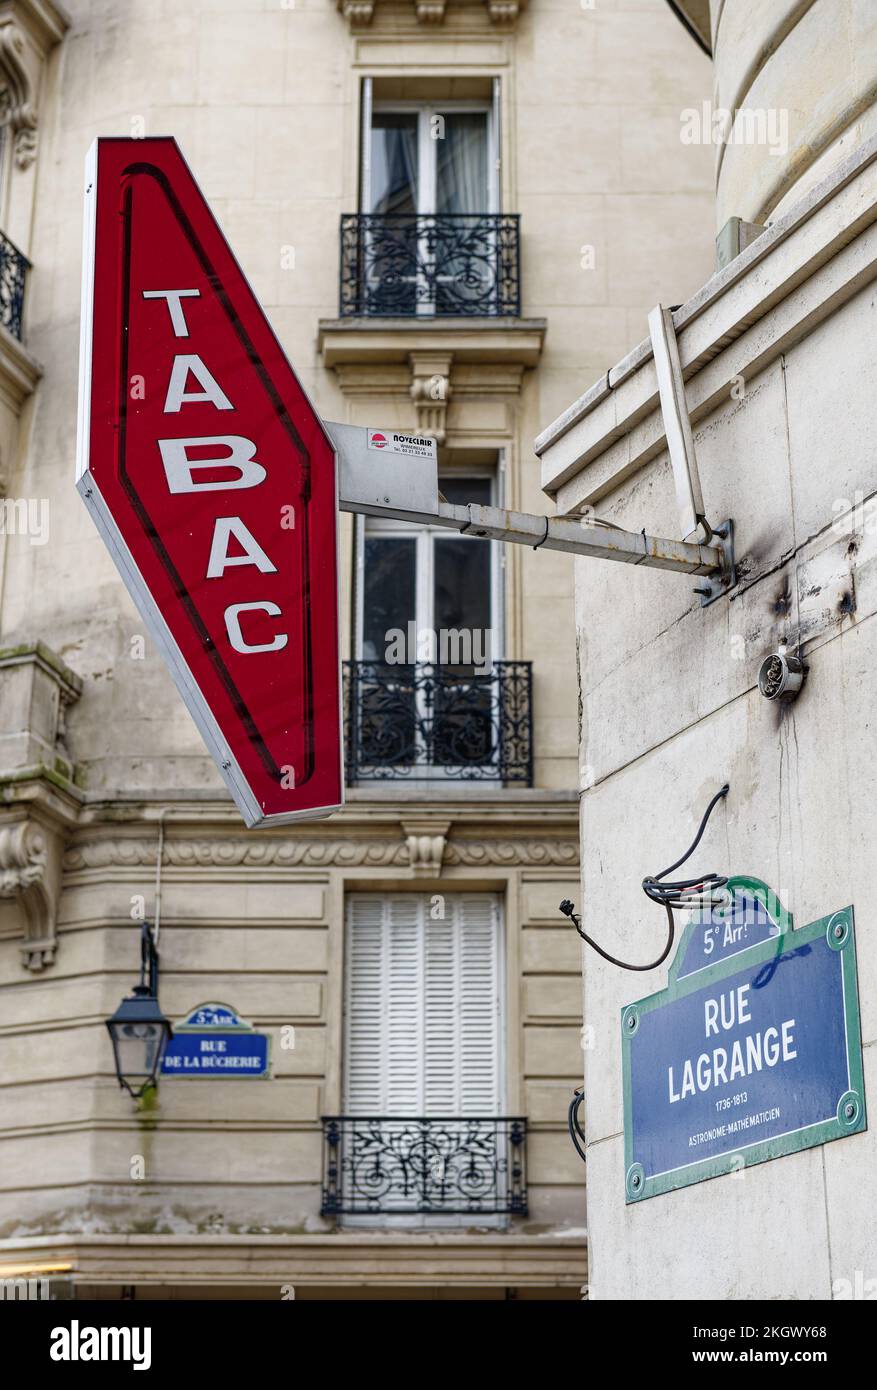 Red Tabac sign at an angle on the streets of Paris, France, with a traditional French city balcony behind., Le Legrange street sign Stock Photo